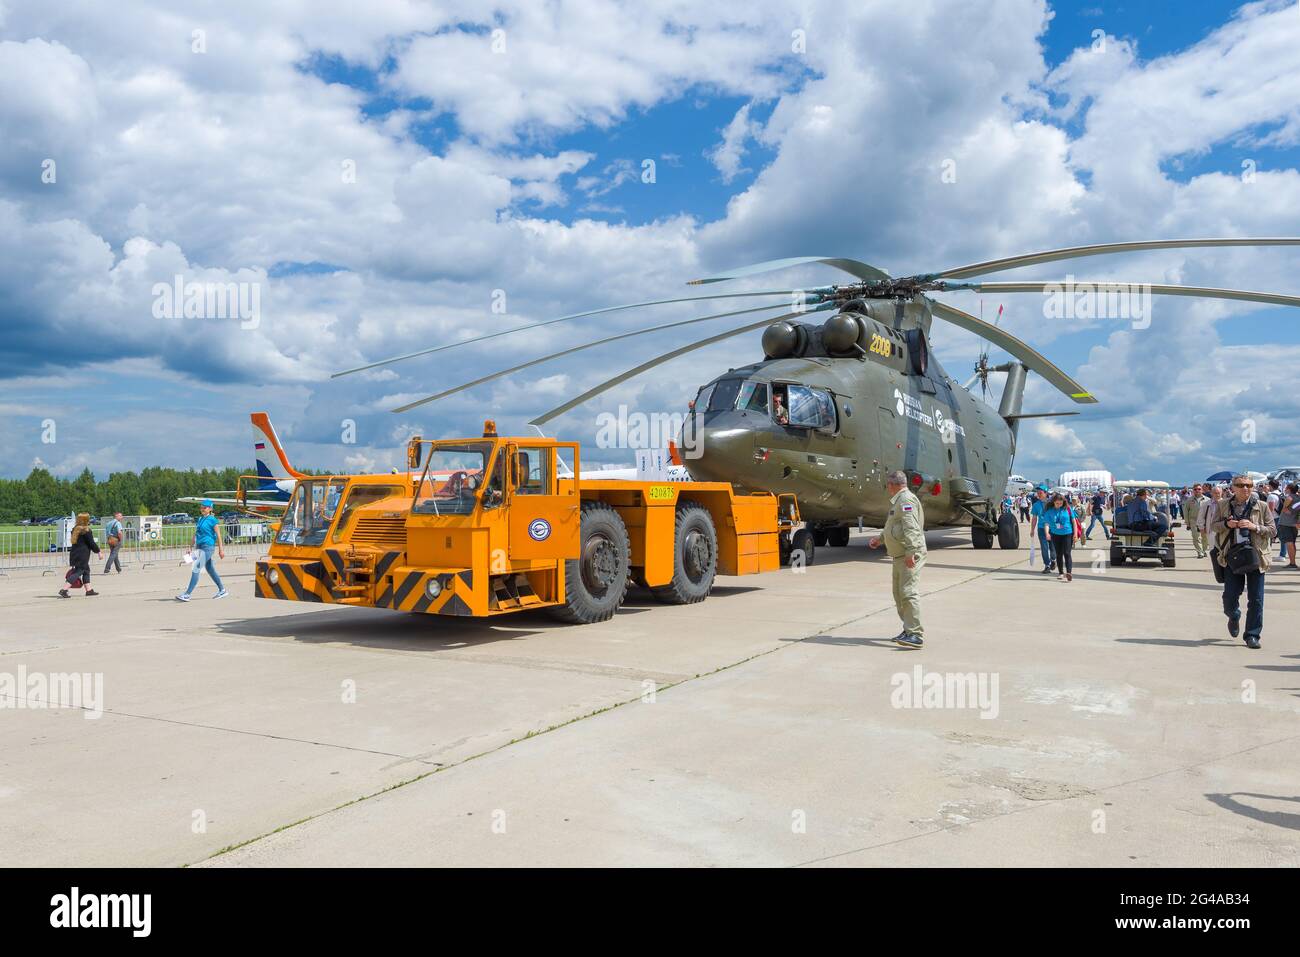 ZHUKOVSKY, RUSSIA - JULY 20, 2017: Towing of the Russian heavy transport helicopter Mi-26T2 on the MAKS-2017 air show Stock Photo